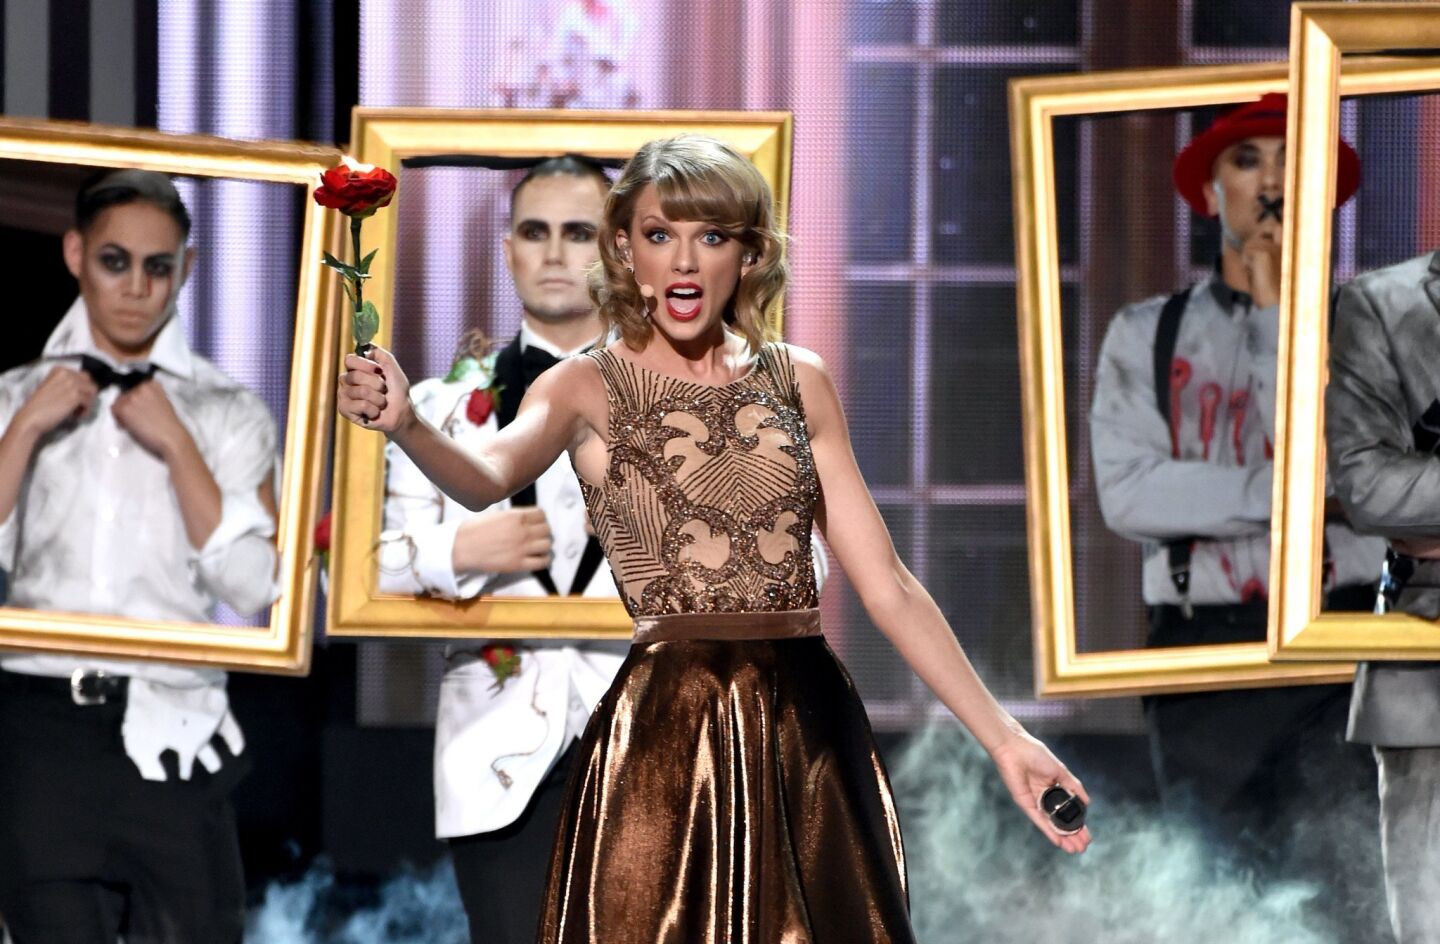 Taylor Swift presents a picturesque performance.